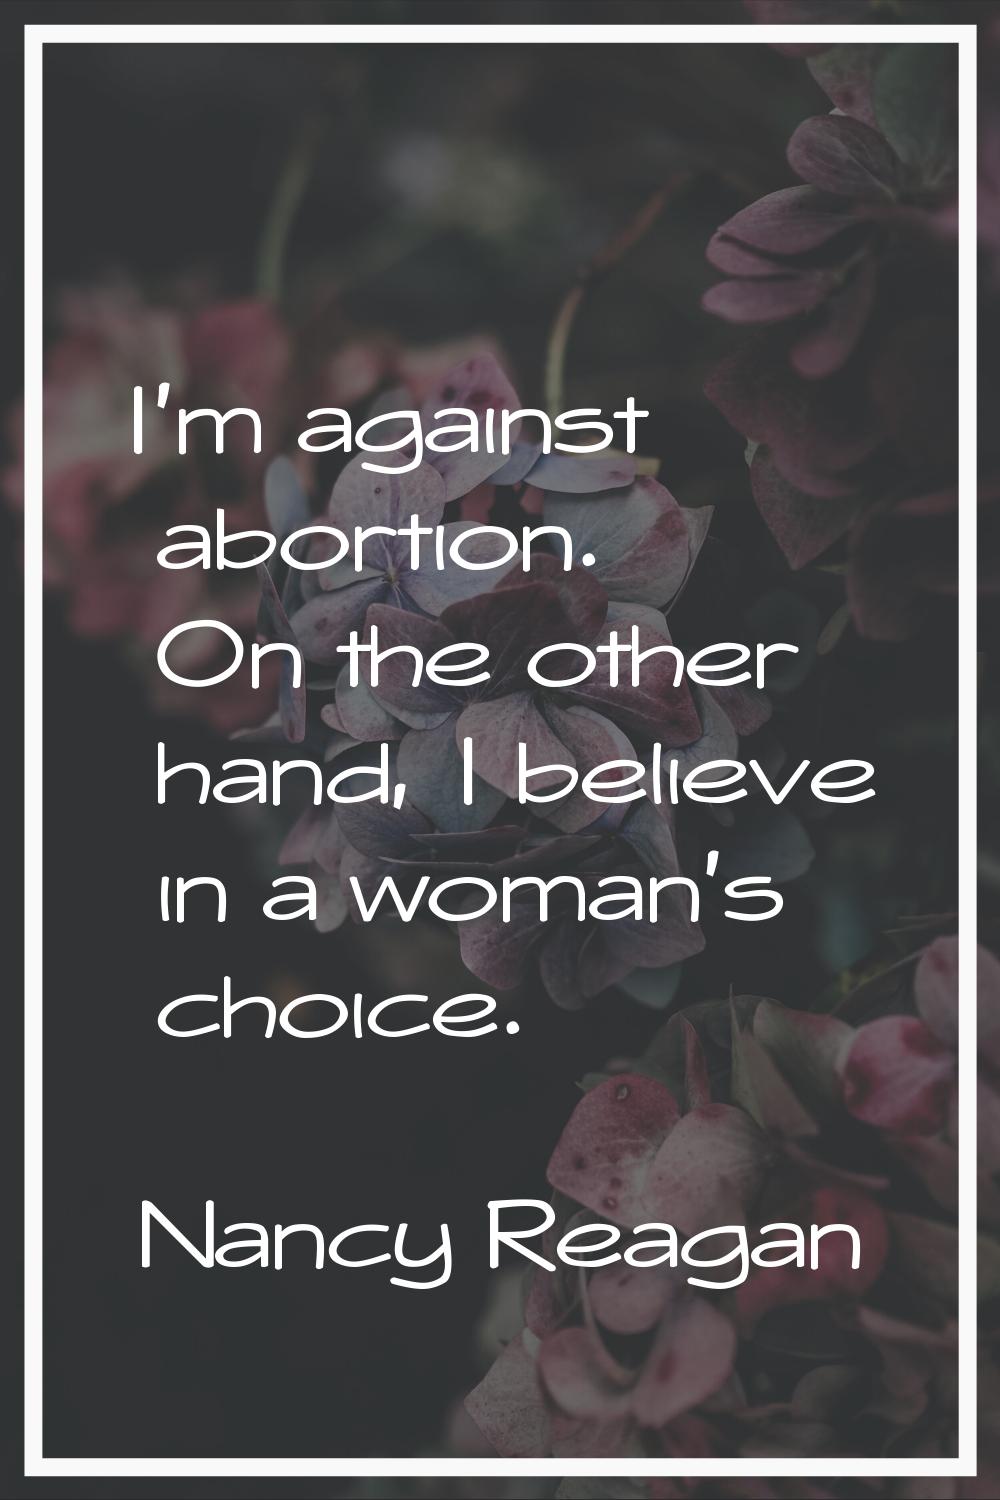 I'm against abortion. On the other hand, I believe in a woman's choice.